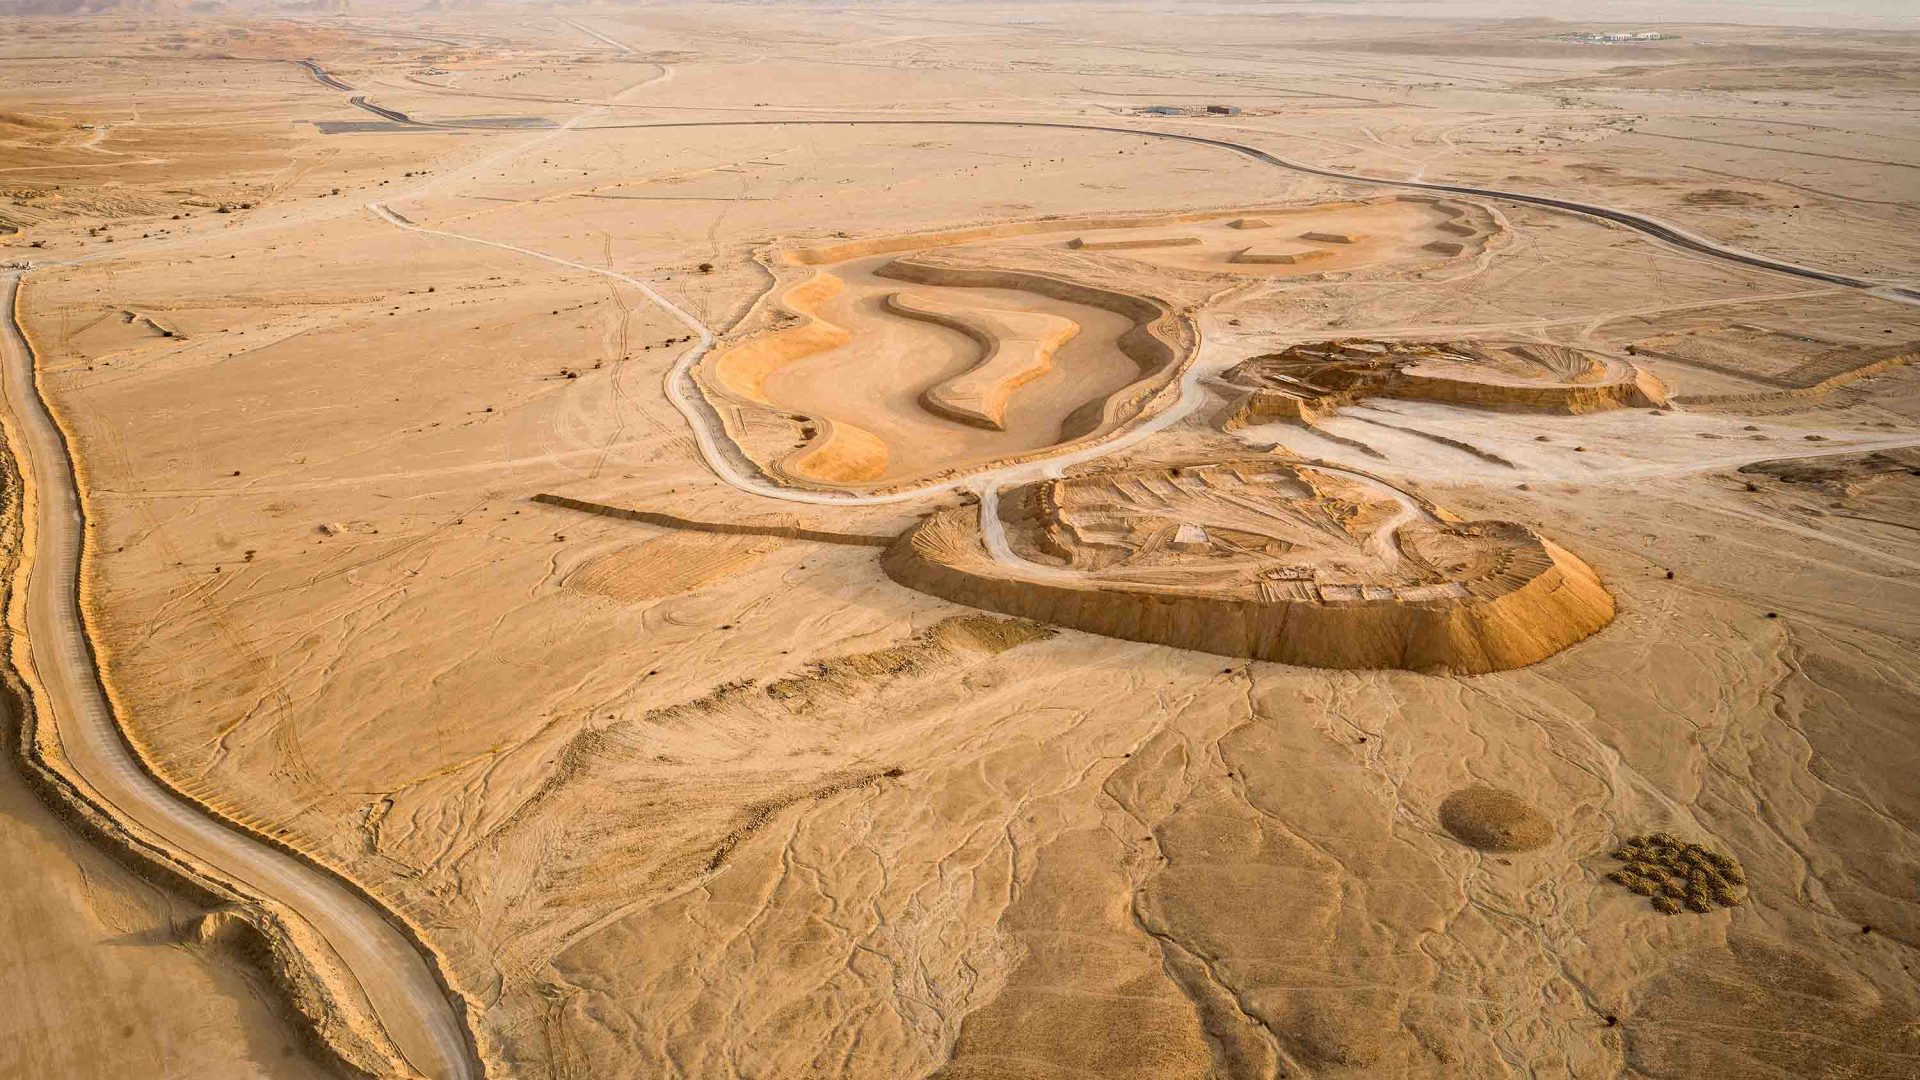 An aerial view over the desert.